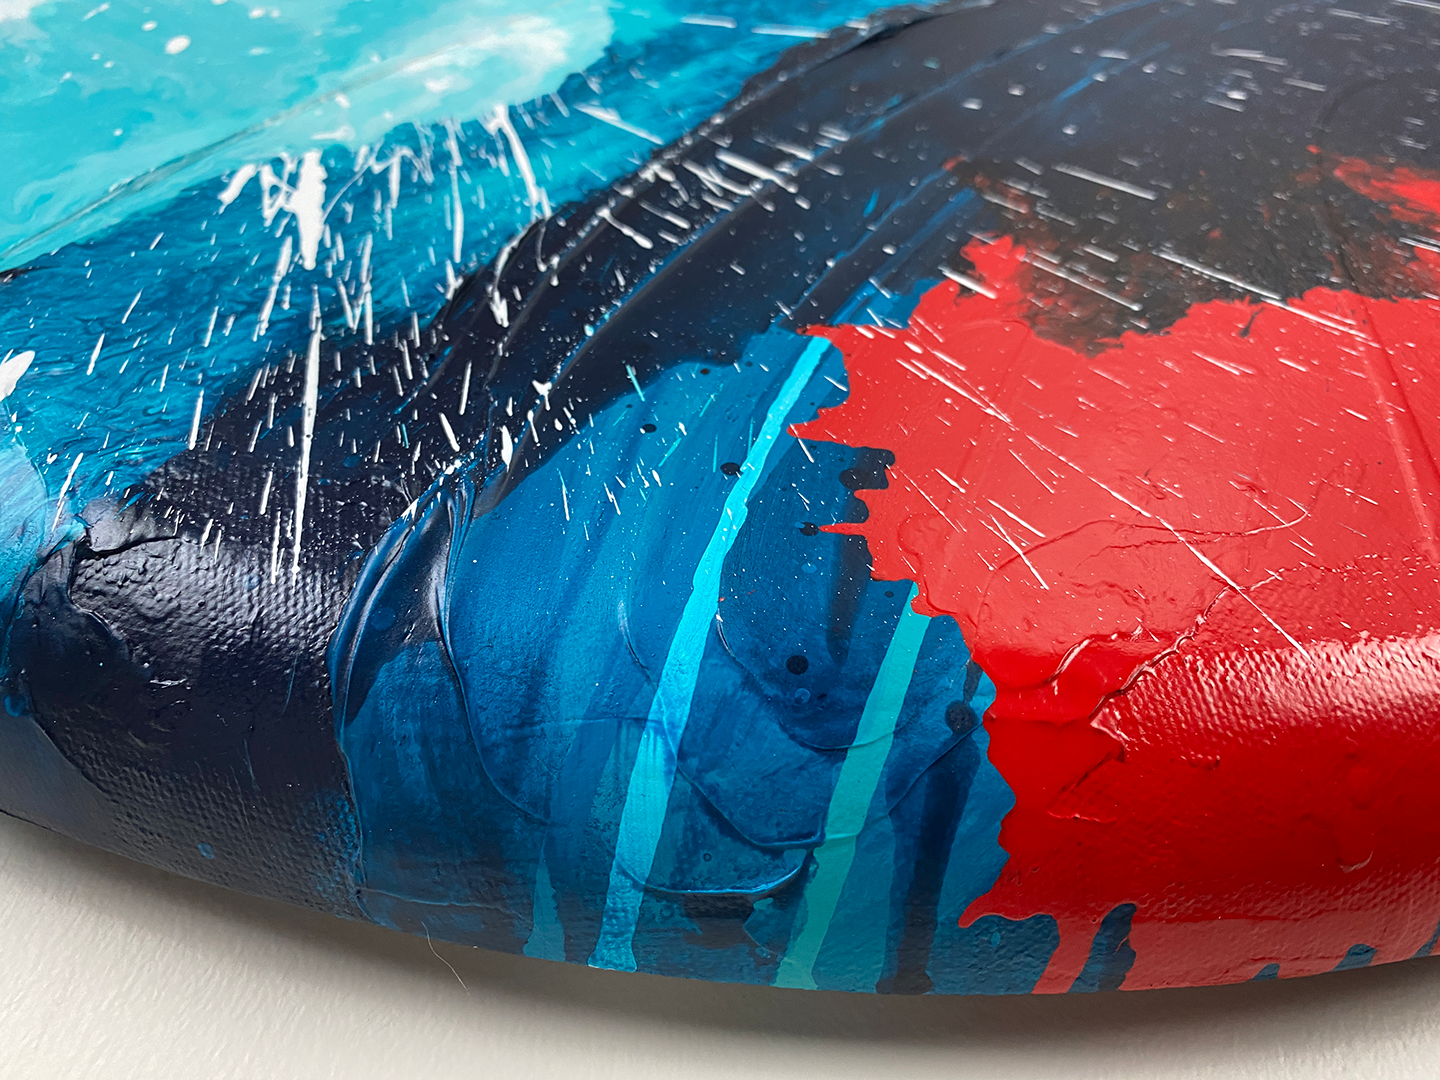 Abstract, expressionism, acrylic painting close-up showing the curved edge 2 and tex-ture. Overlapping explosions of dark blue, turquoise, bright red and white